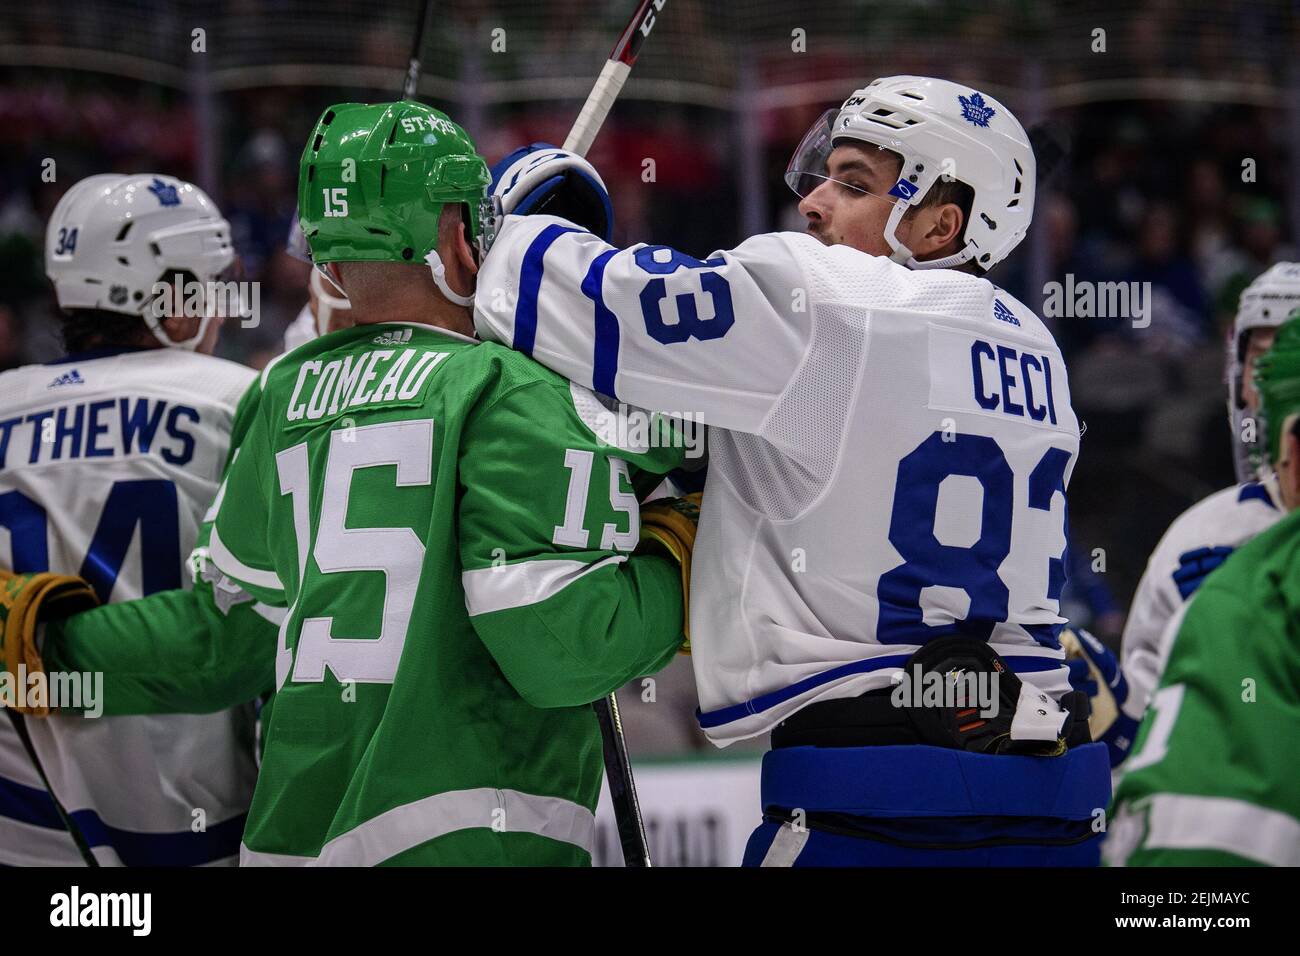 jan-29-2020-dallas-texas-usa-dallas-stars-left-wing-blake-comeau-15-and-toronto-maple-leafs-defenseman-cody-ceci-83-fight-during-the-second-period-at-the-american-airlines-center-mandatory-credit-jerome-miron-usa-today-sports-2EJMAYC.jpg